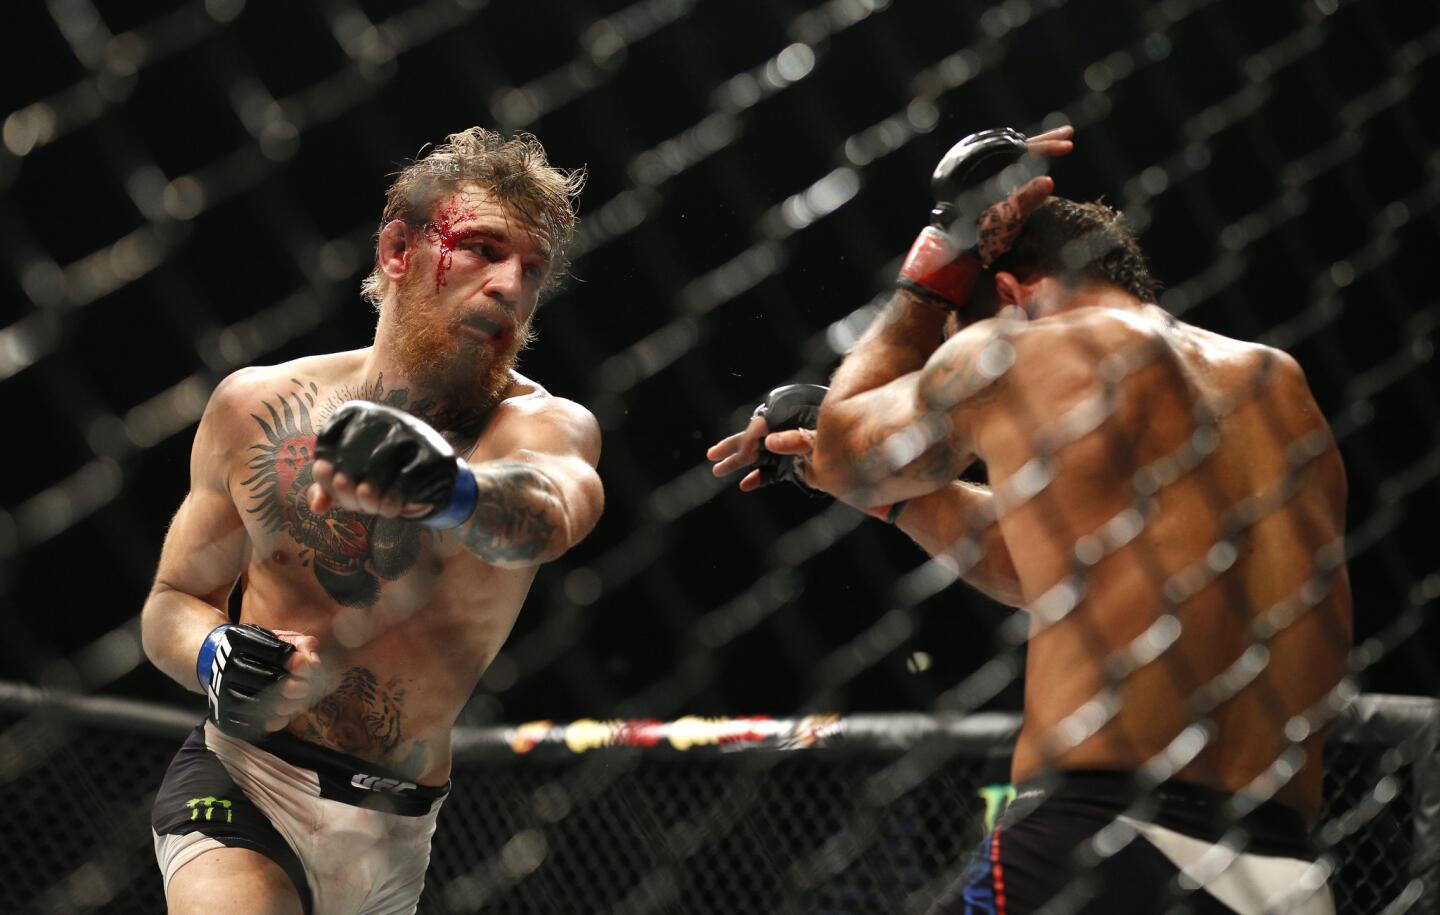 Conor McGregor, left, takes a swing at Chad Mendes during their interim featherweight title mixed martial arts bout at UFC 189 Saturday, July 11, 2015, in Las Vegas. (AP Photo/John Locher)